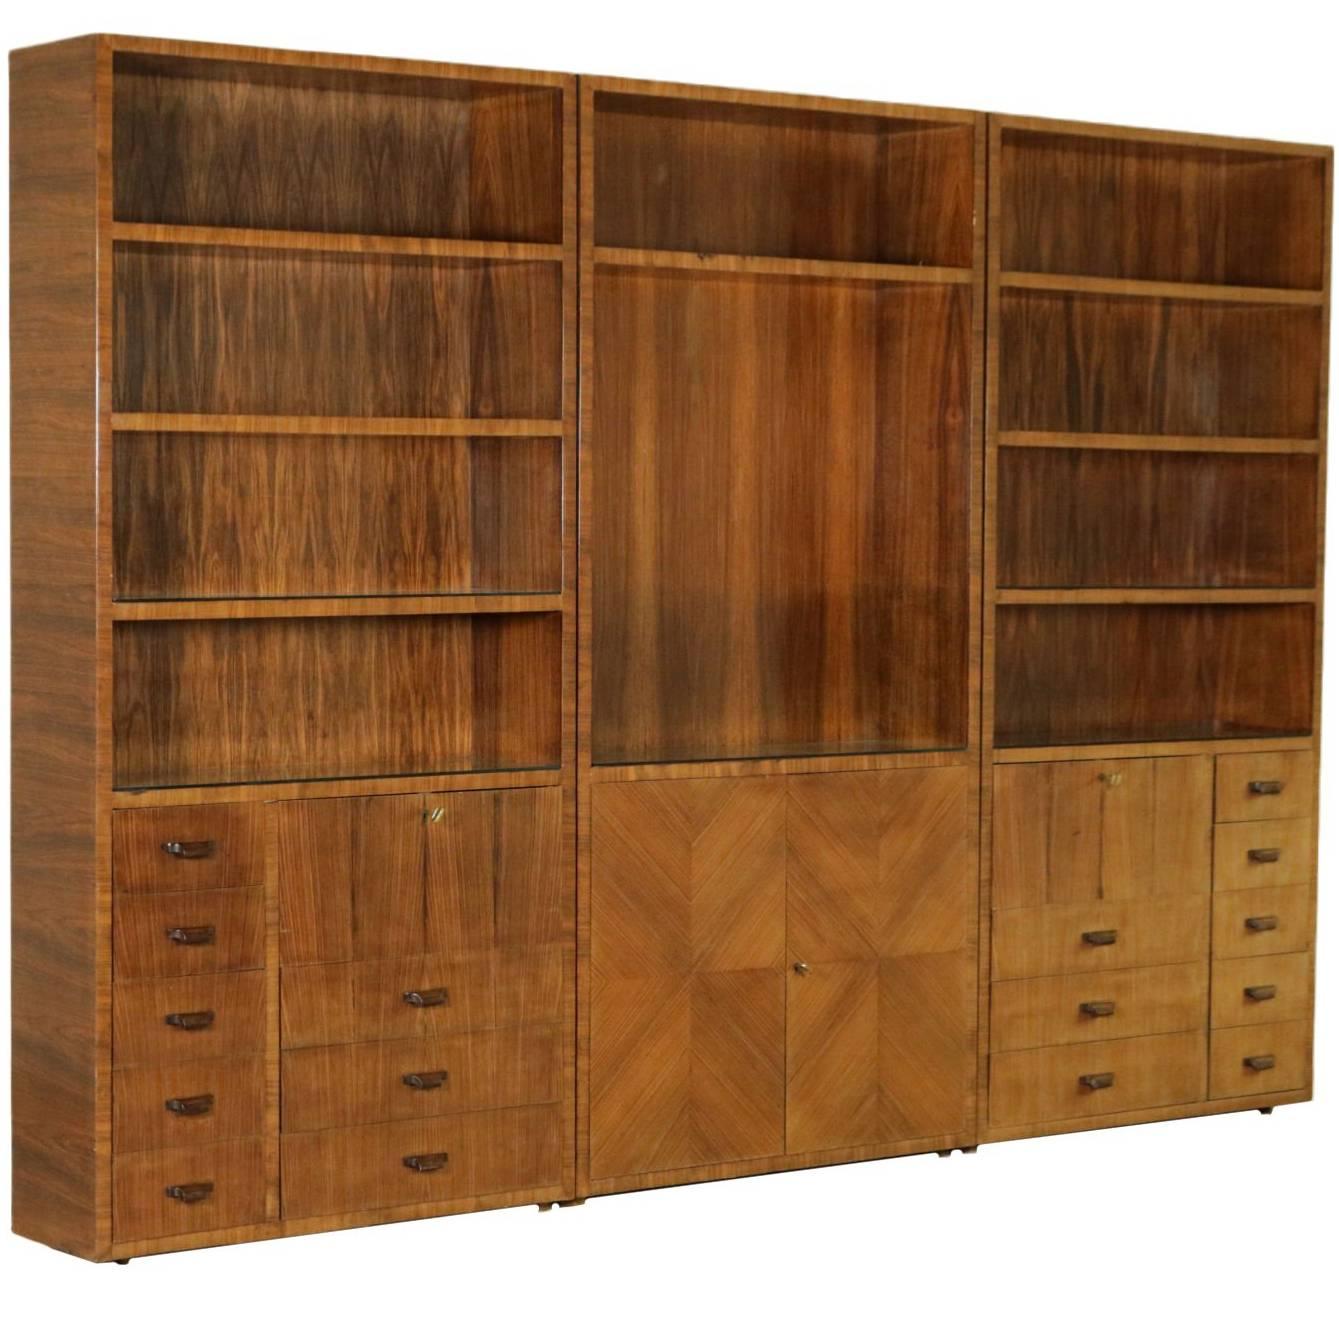 Bookcase Rosewood Veneer Glass Vintage Manufactured in Italy, 1940s